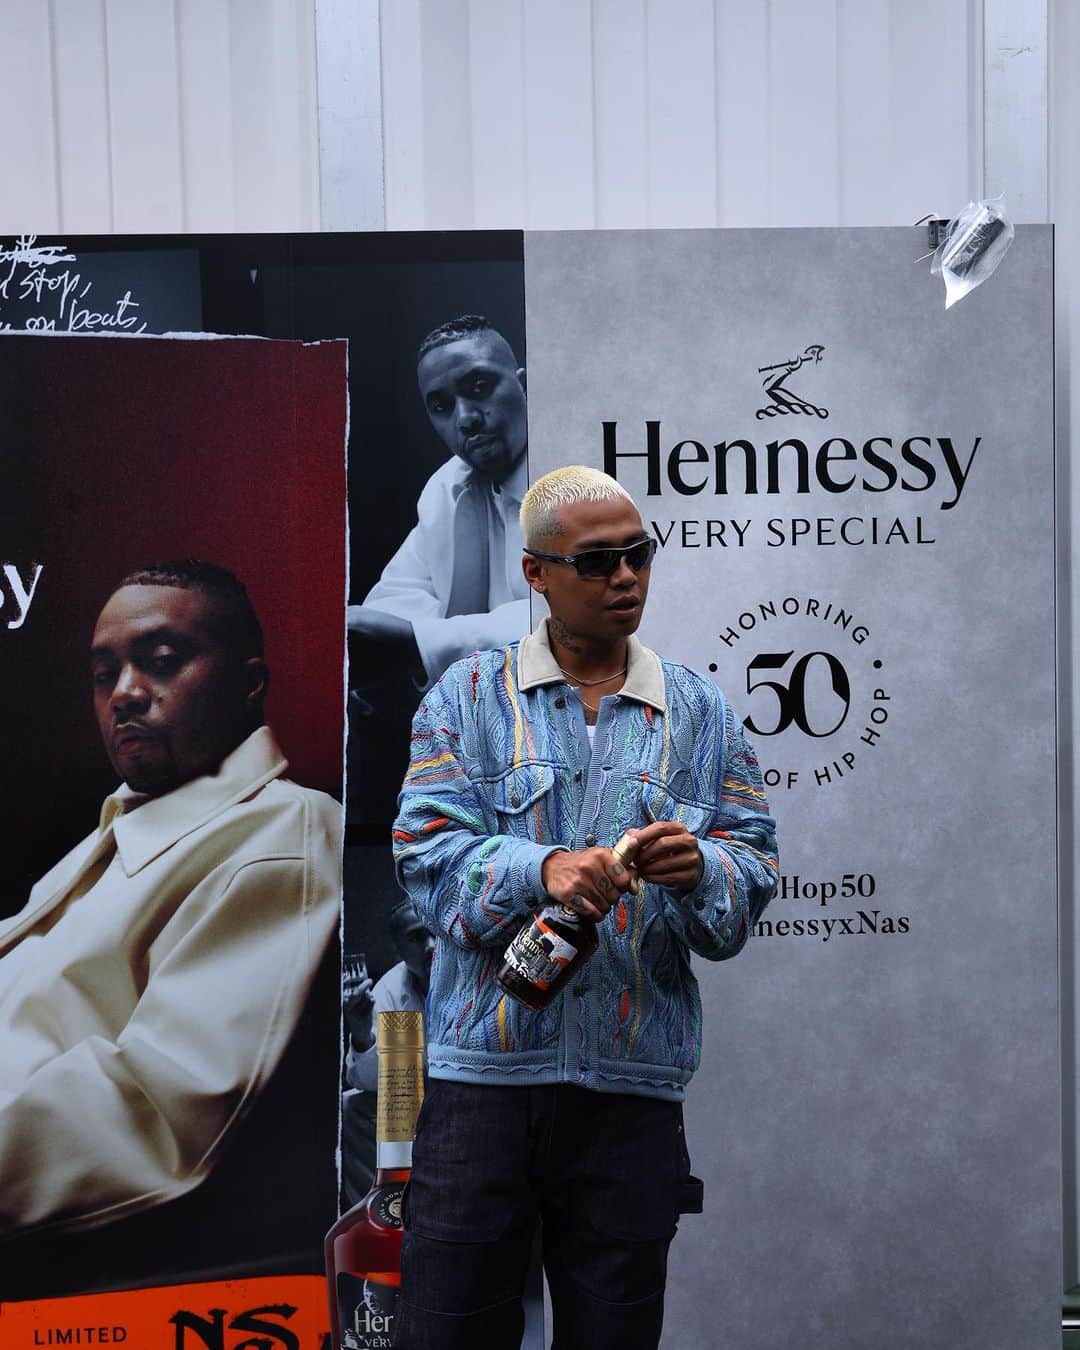 MonyHorseのインスタグラム：「@hennessy  50歳 NAS 50歳 Hip Hop 50歳 最高や‼️  #Hennnessy #HennessyVS #HennessyXNas #THEHOPE #HipHop50」